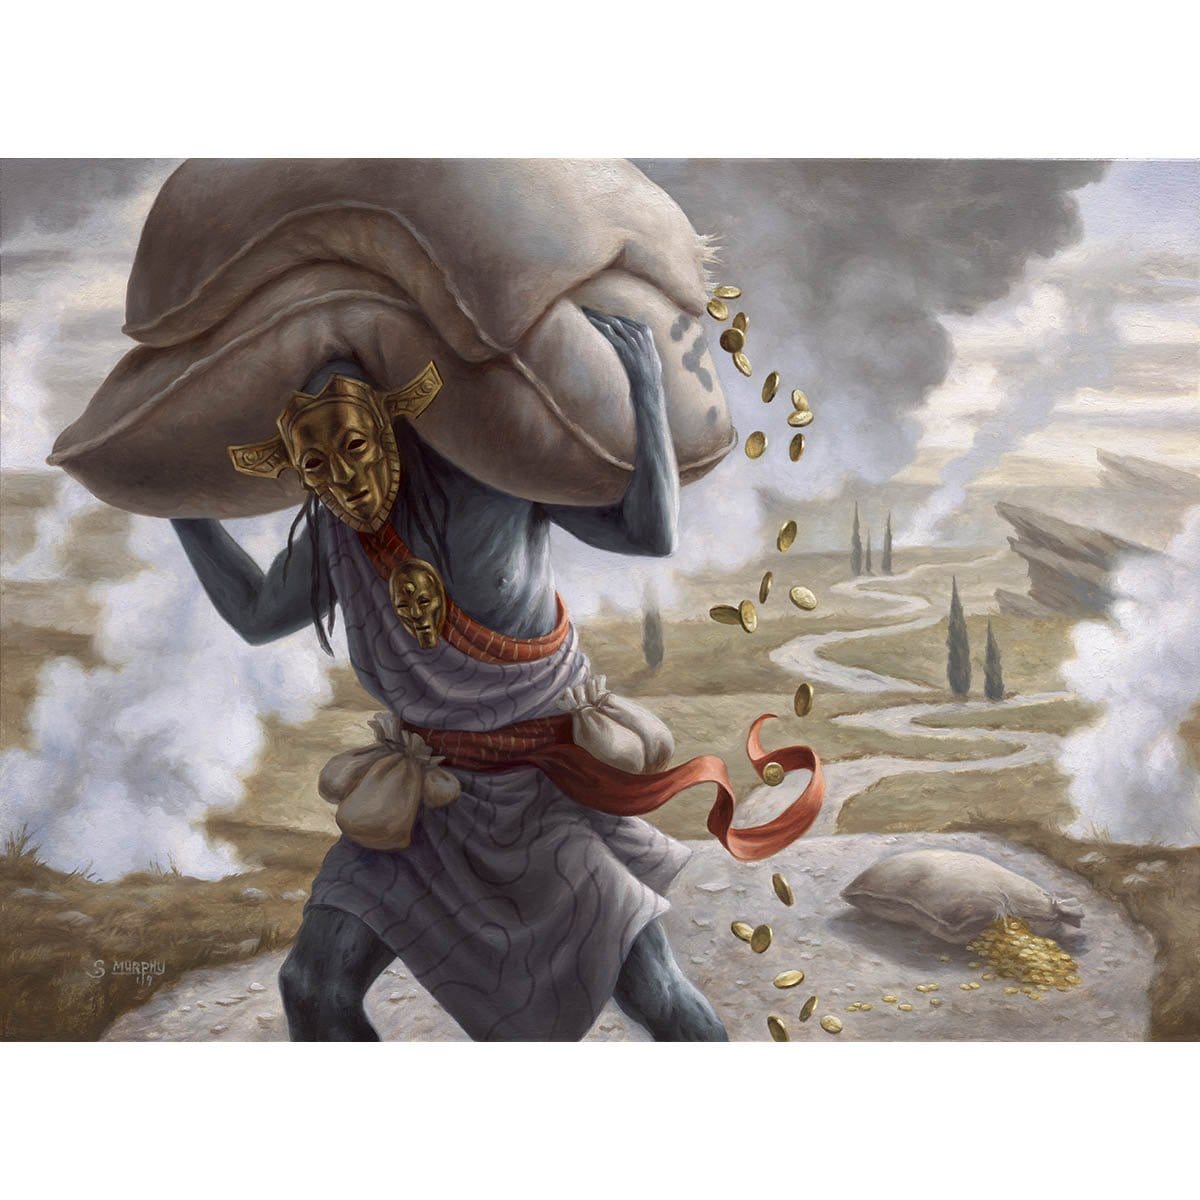 Gray Merchant of Asphodel Print - Print - Original Magic Art - Accessories for Magic the Gathering and other card games